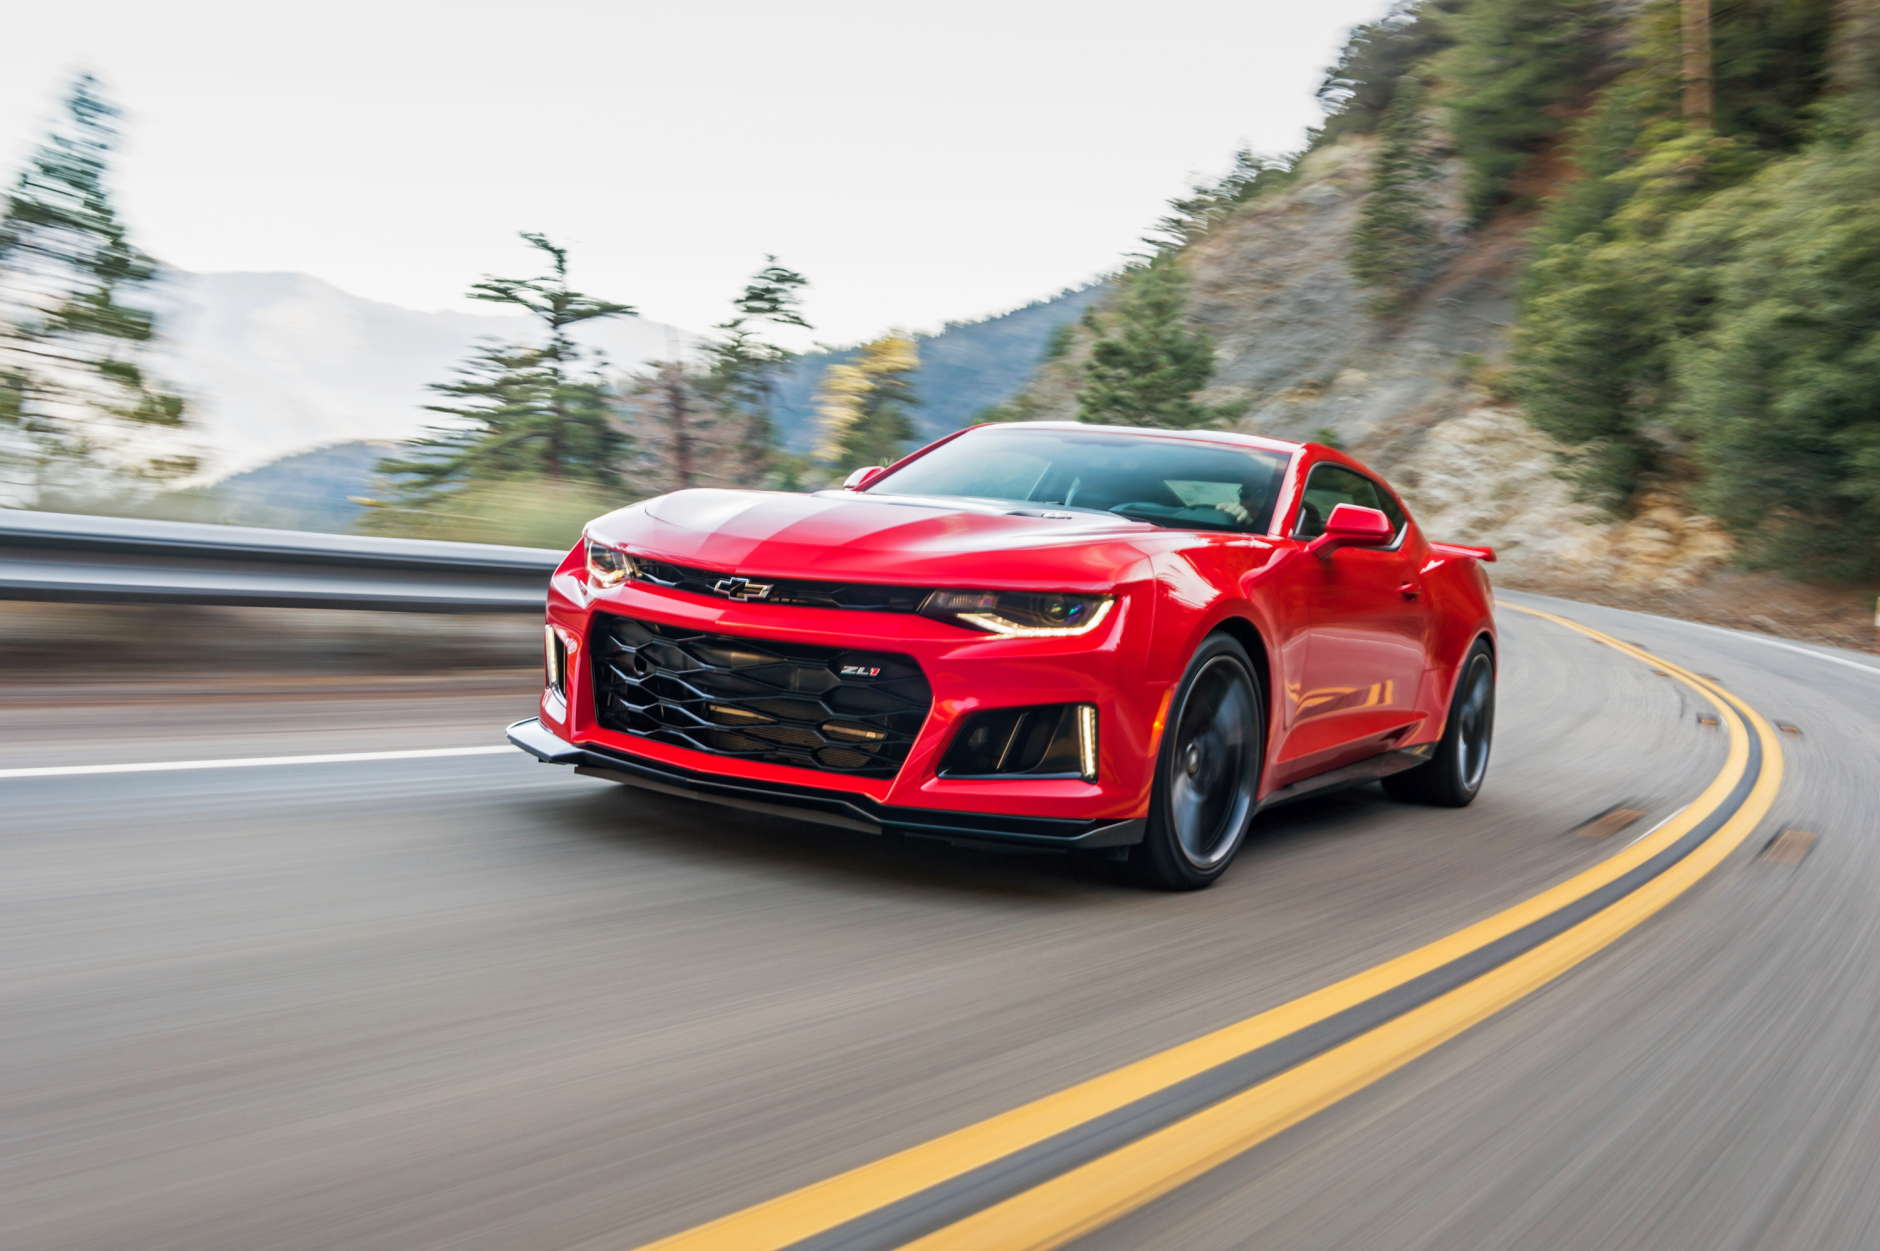 Chevrolet Camaro ZL1, $61,140
The Camaro has seen many generations and performance upgrades, and this is the most important one yet. The 2017 Camaro ZL1 has a stat sheet that would make last year's Corvette nervous, and comes to the table ready to race. The legend continues to inspire today just as it did 50 years ago, as the Camaro reaches a whole new audience with this instant collector's item. (Jessica Lynn Walker)